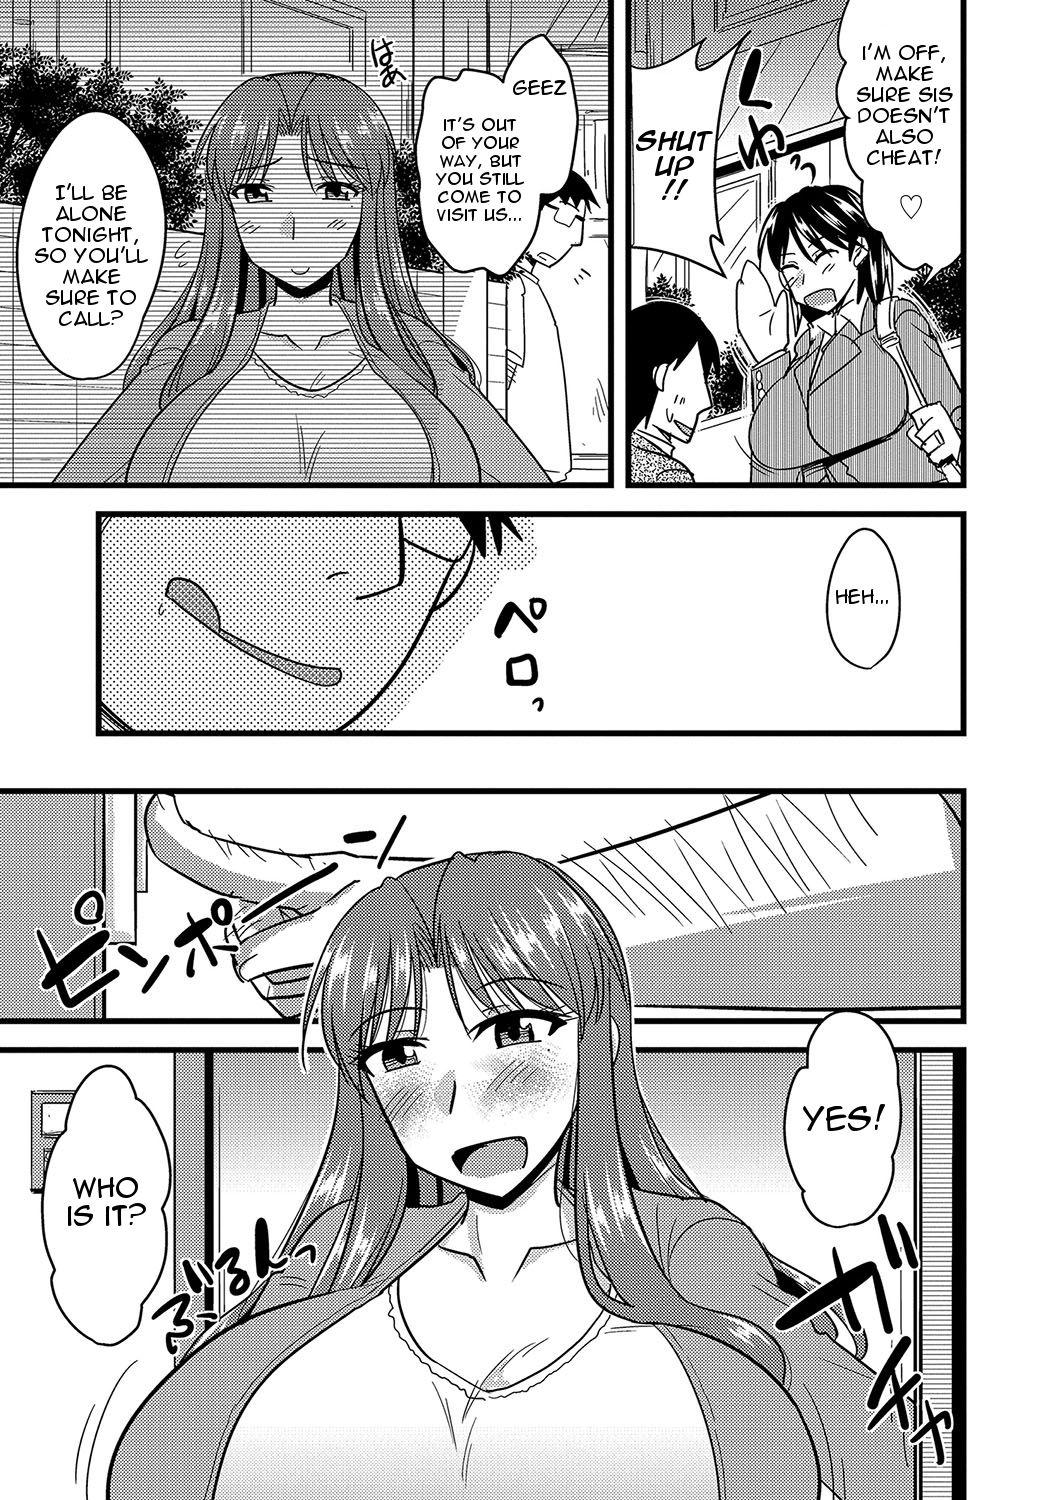 Twerking Tanin no Tsuma no Netorikata | How to Steal Another Man's Wife Ch. 1-3 Made - Page 6